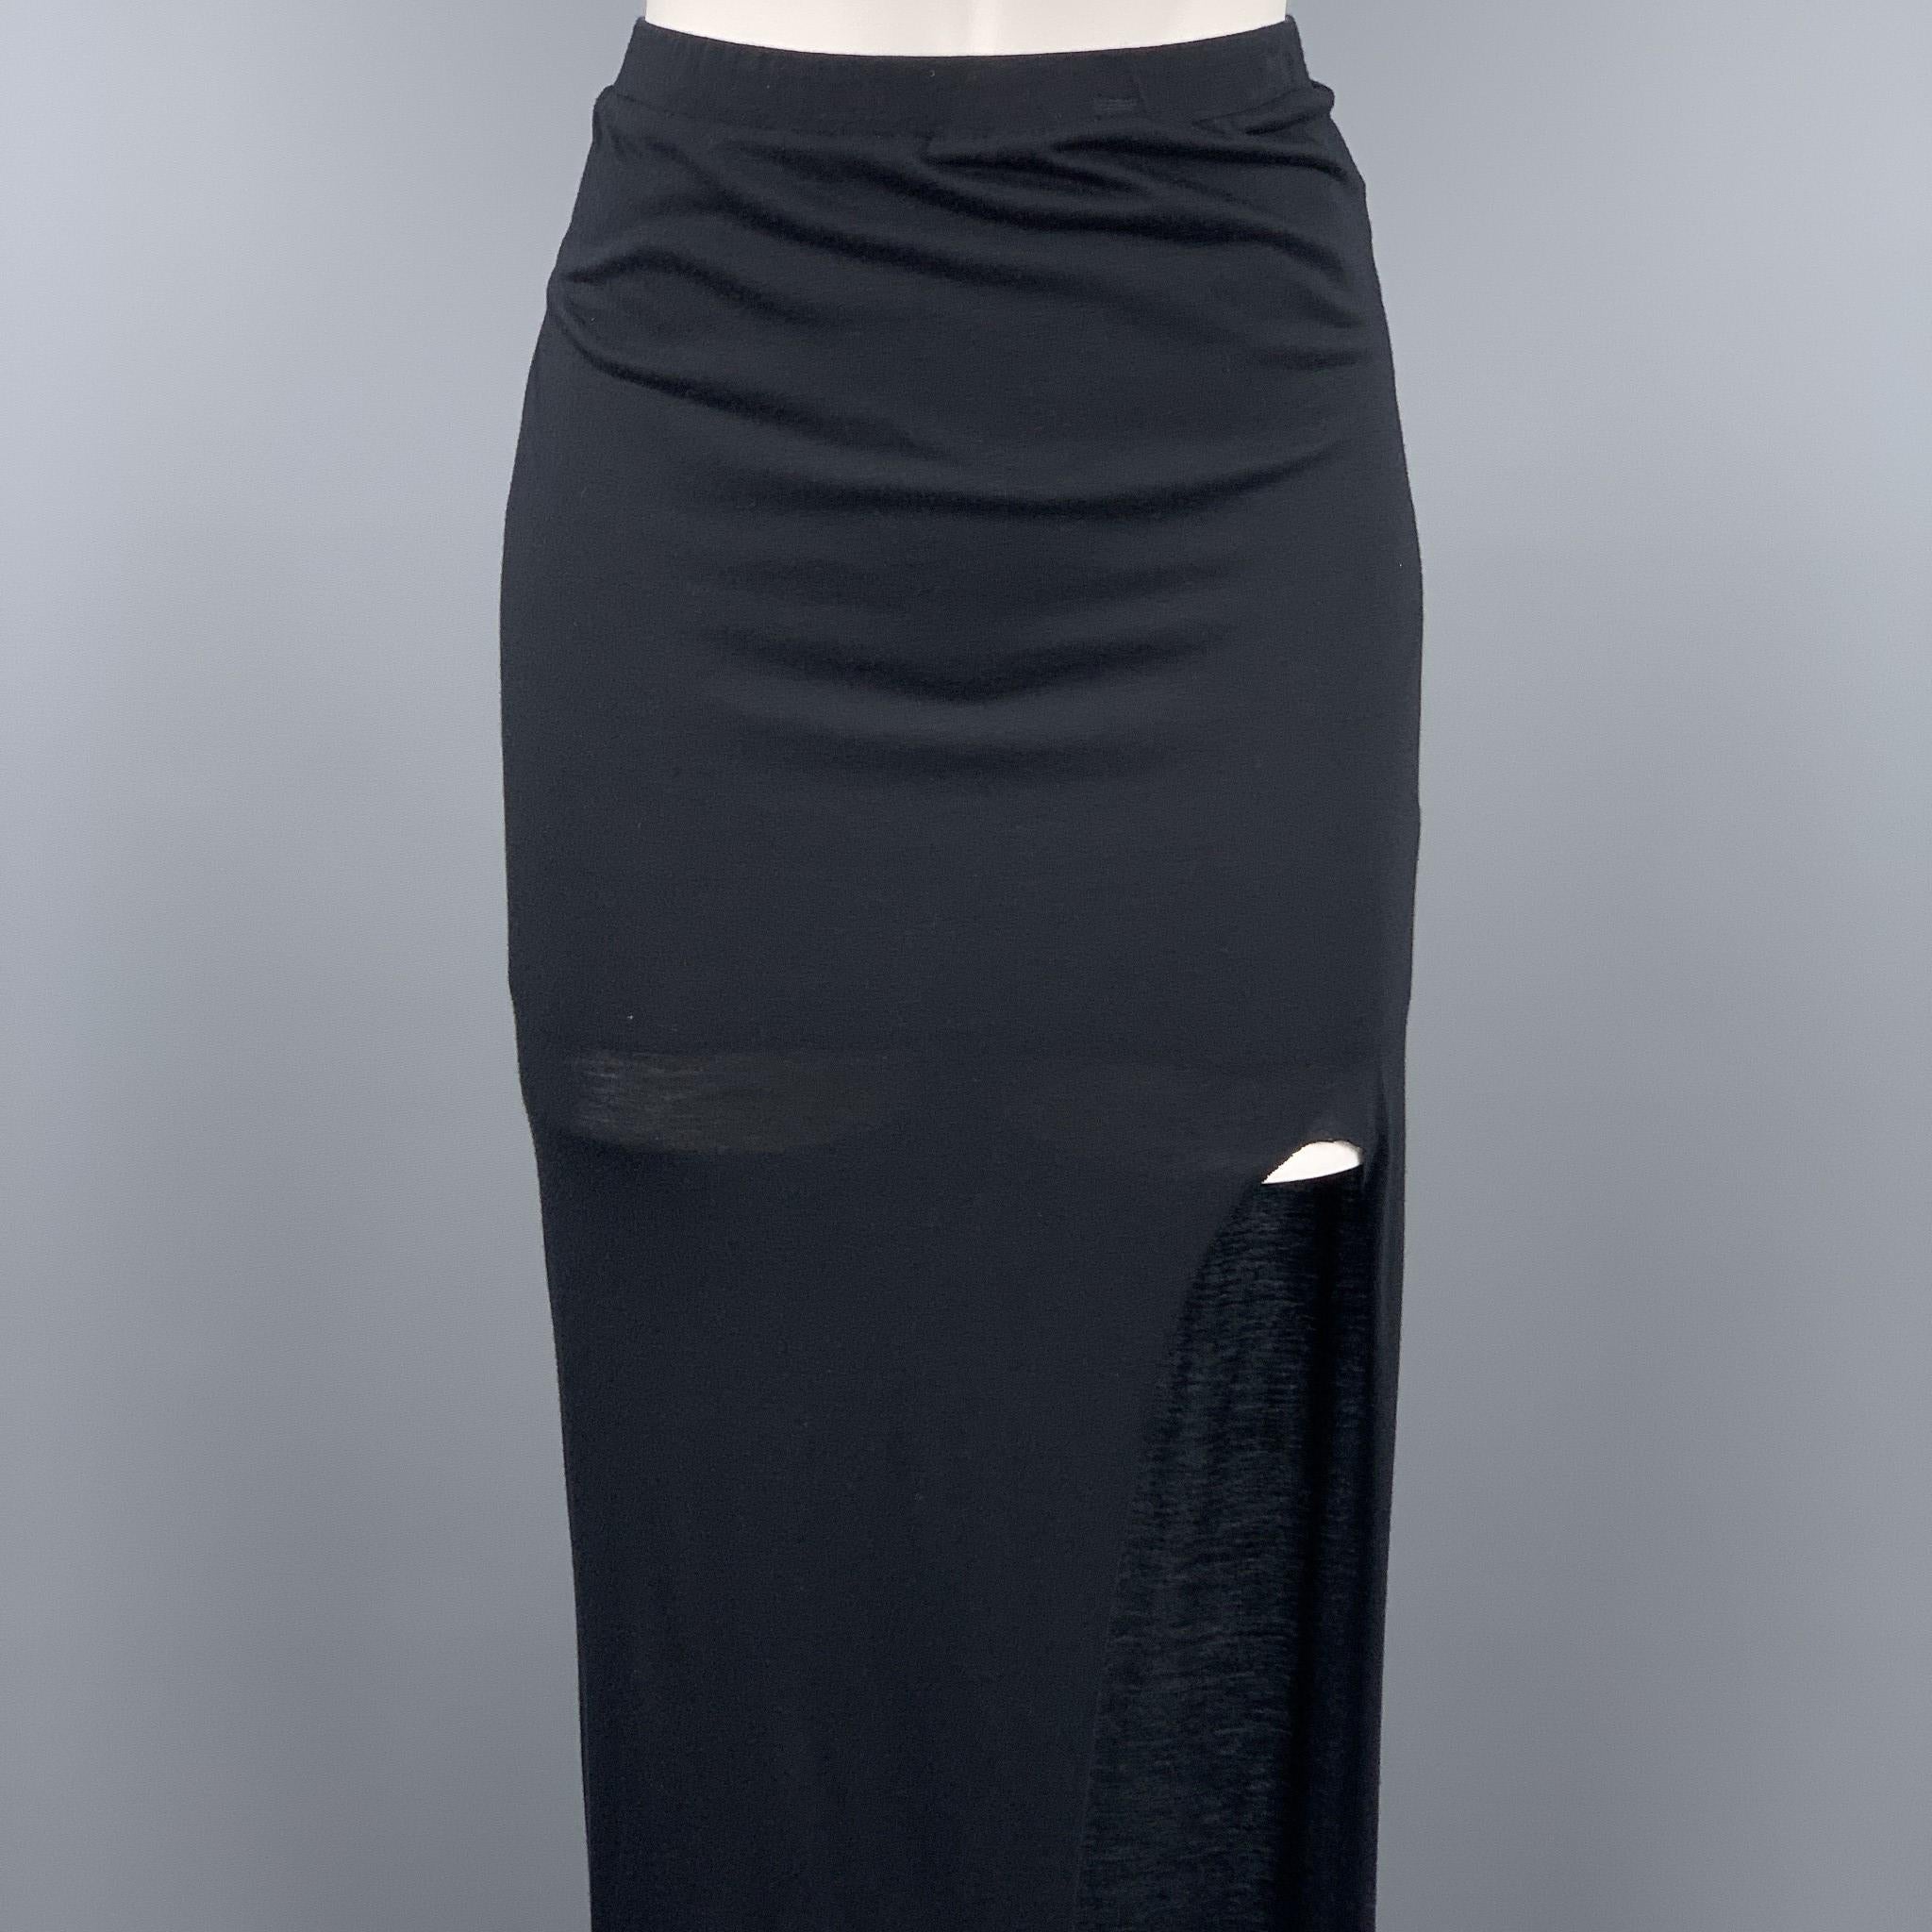 HELMUT LANG skirt comes in a black jersey modal blend featuring a maxi style, asymmetrical design, and a elastic waistband. Made in USA.

Very Good Pre-Owned Condition.
Marked: S

Measurements:

Waist: 28 in. 
Hip: 34 in. 
Length: 43 in. 